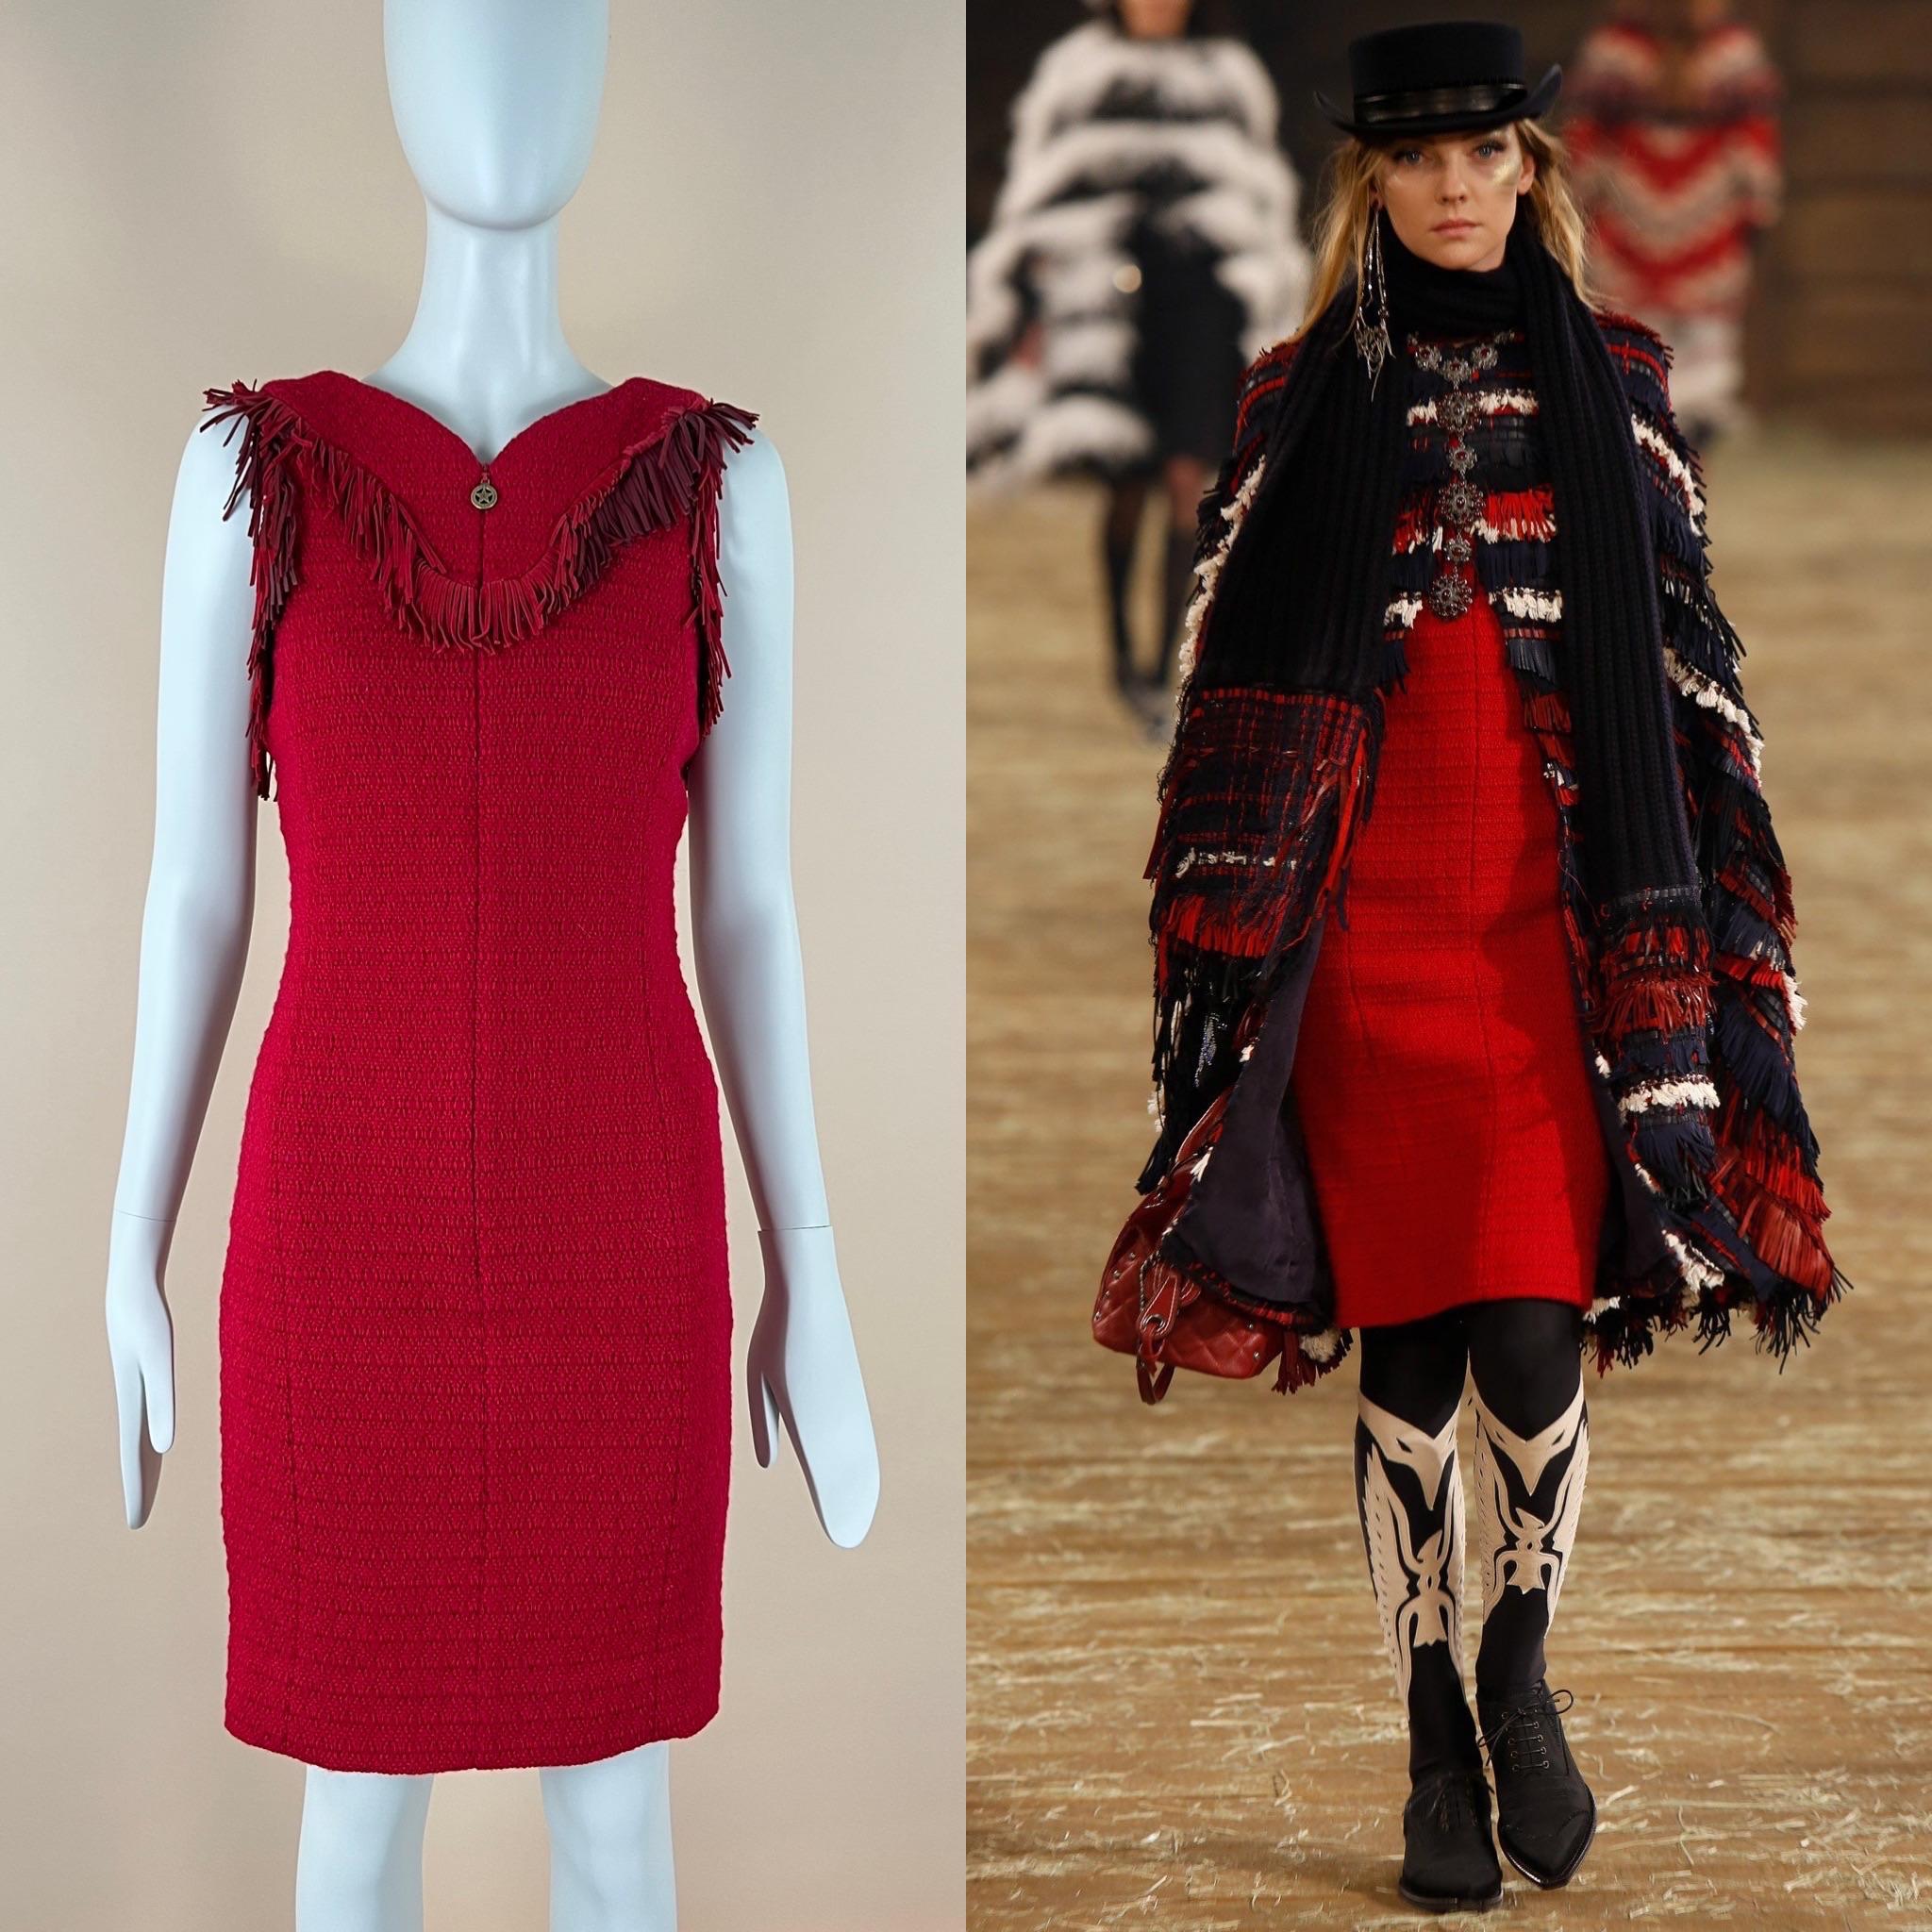 Women's Chanel Dallas Collection Suede Fringed Tweed Dress